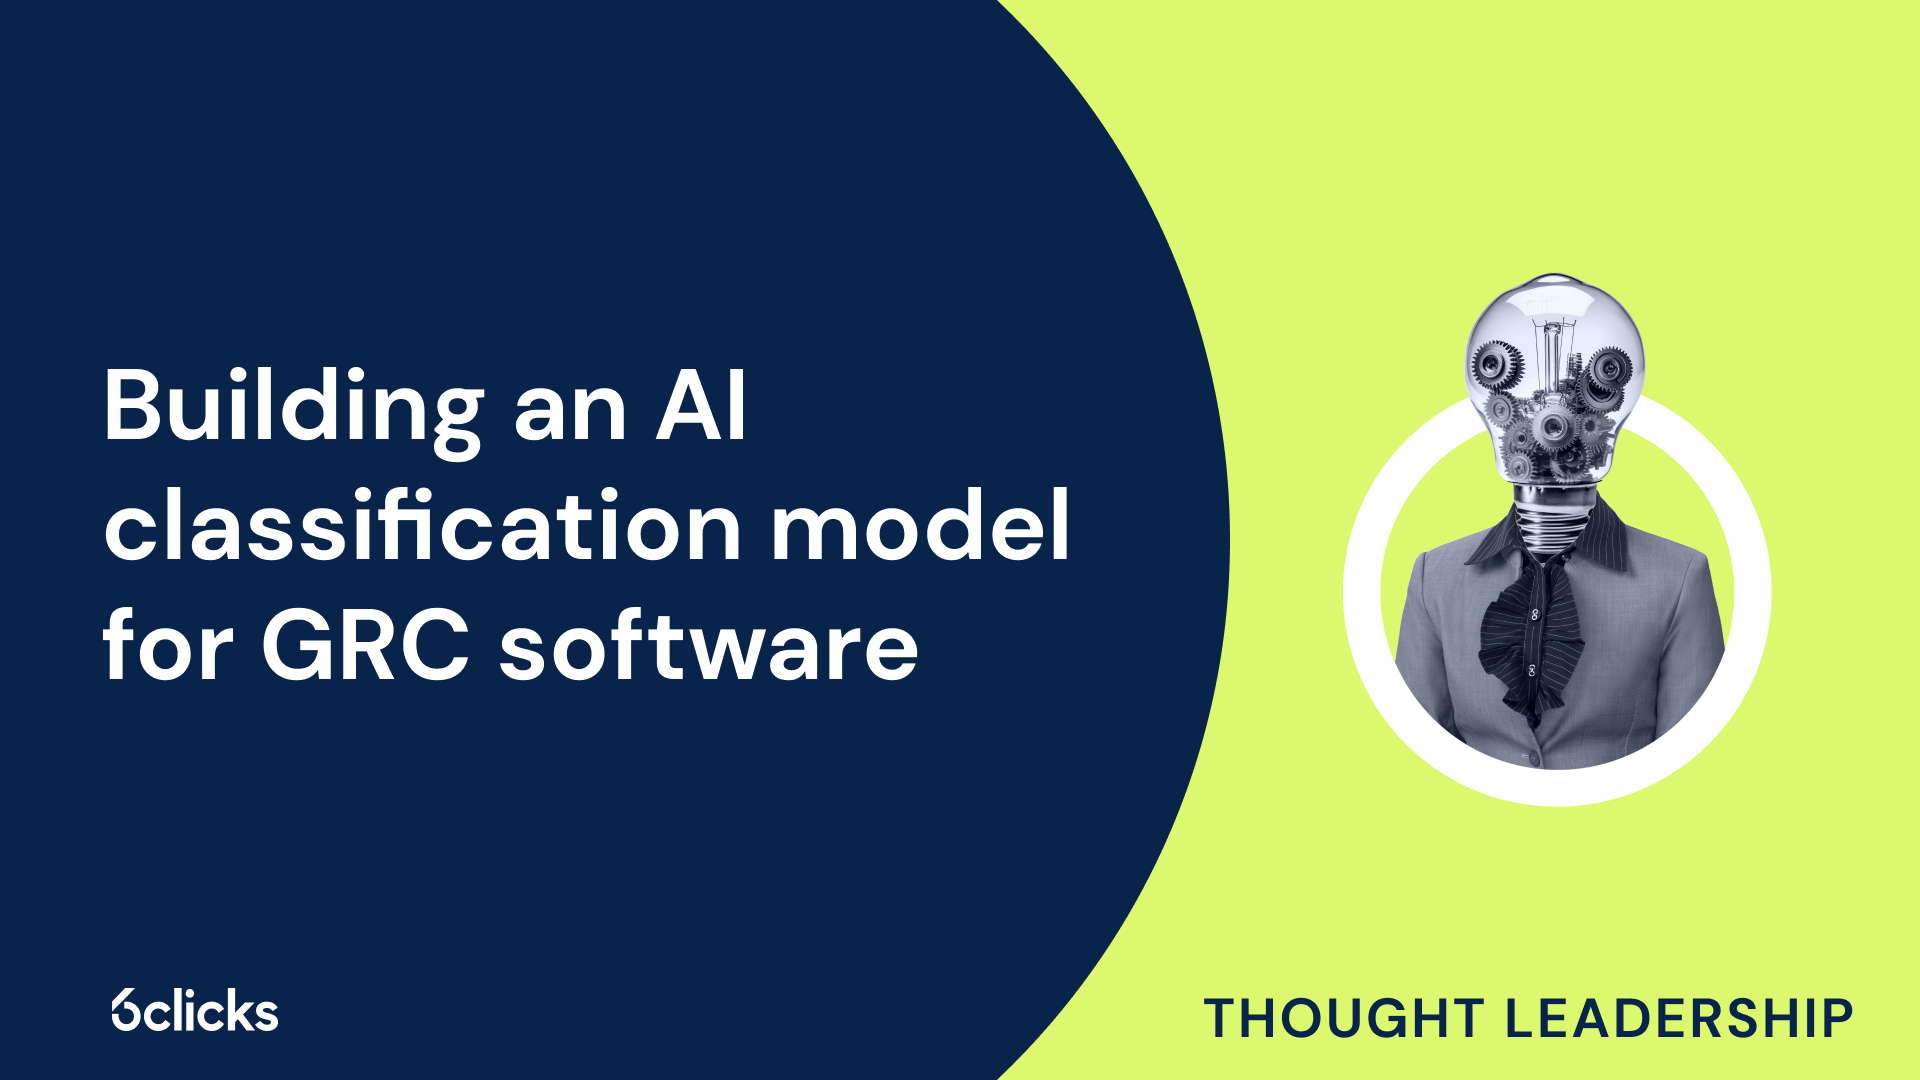 Building an AI classification model for GRC software